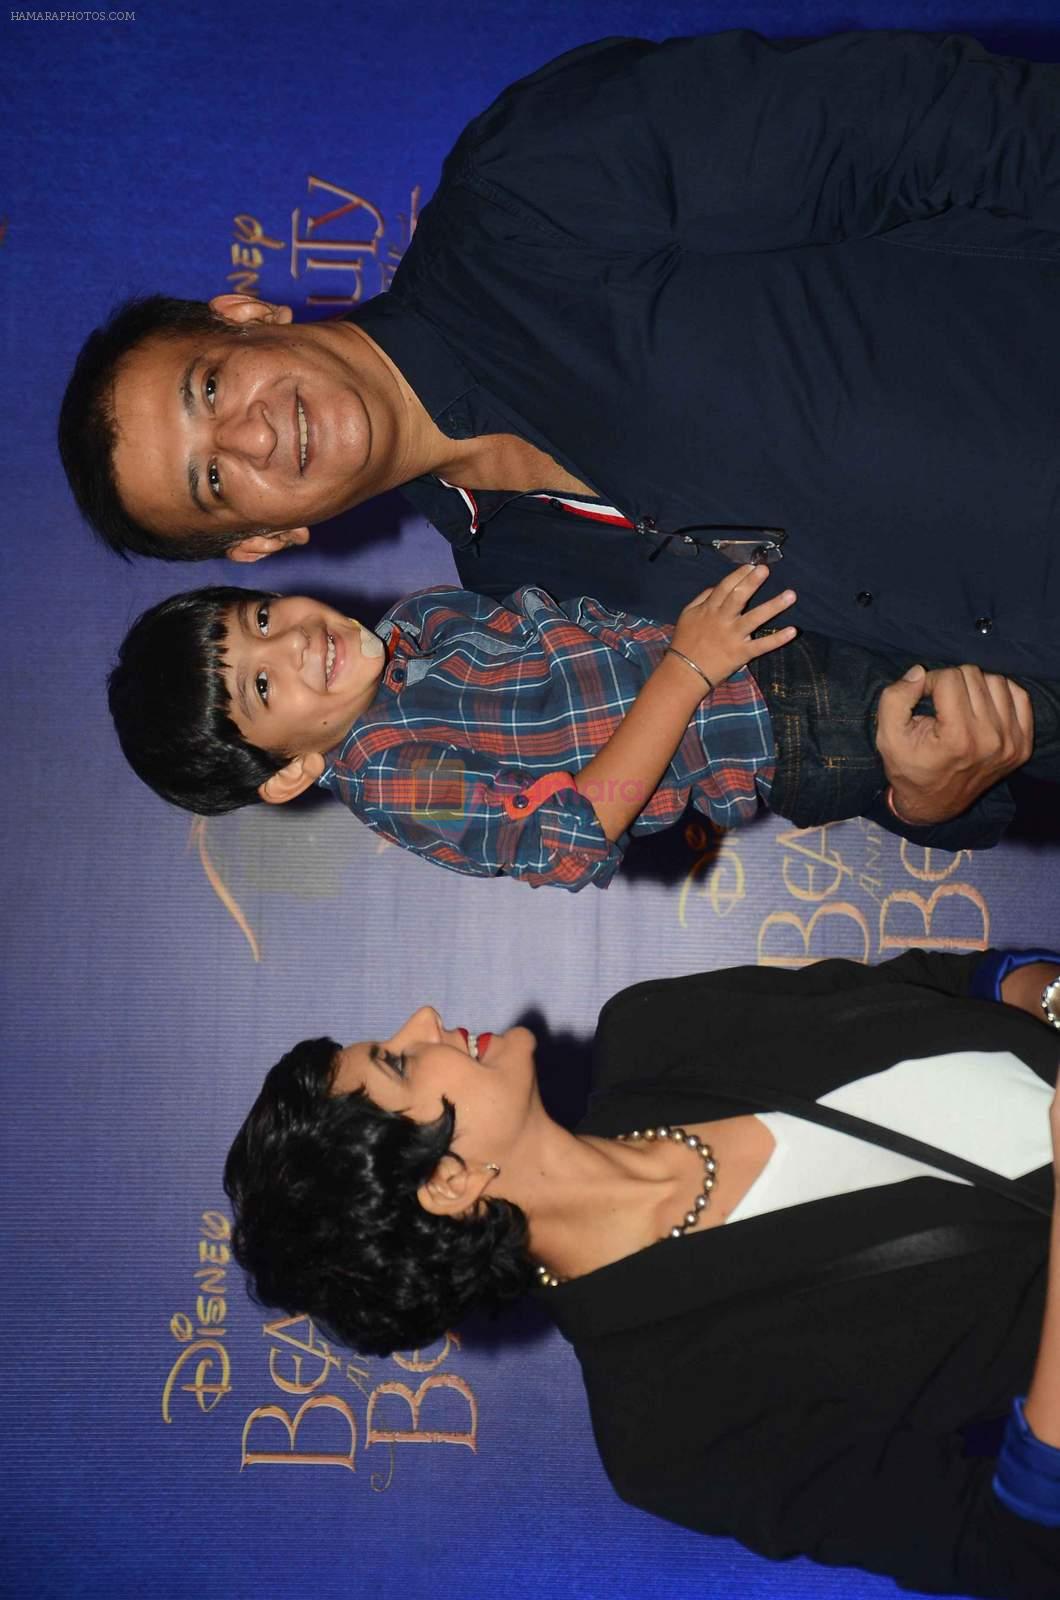 Mandira Bedi at Beauty and the Beast red carpet in Mumbai on 21st Oct 2015